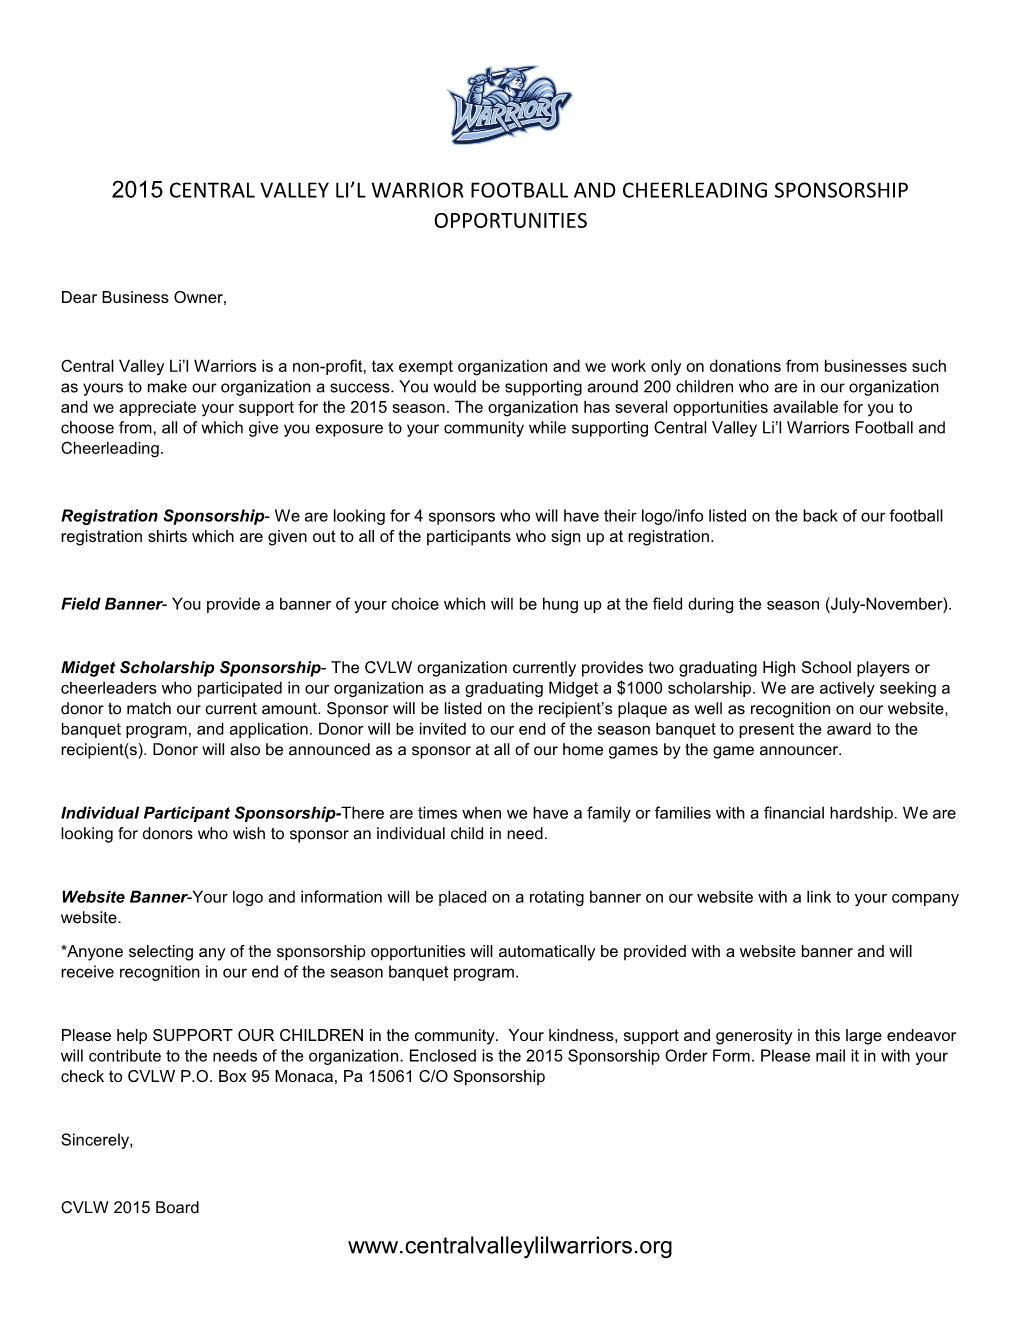 2015 Central Valley Li L Warrior Football and Cheerleading Sponsorship Opportunities